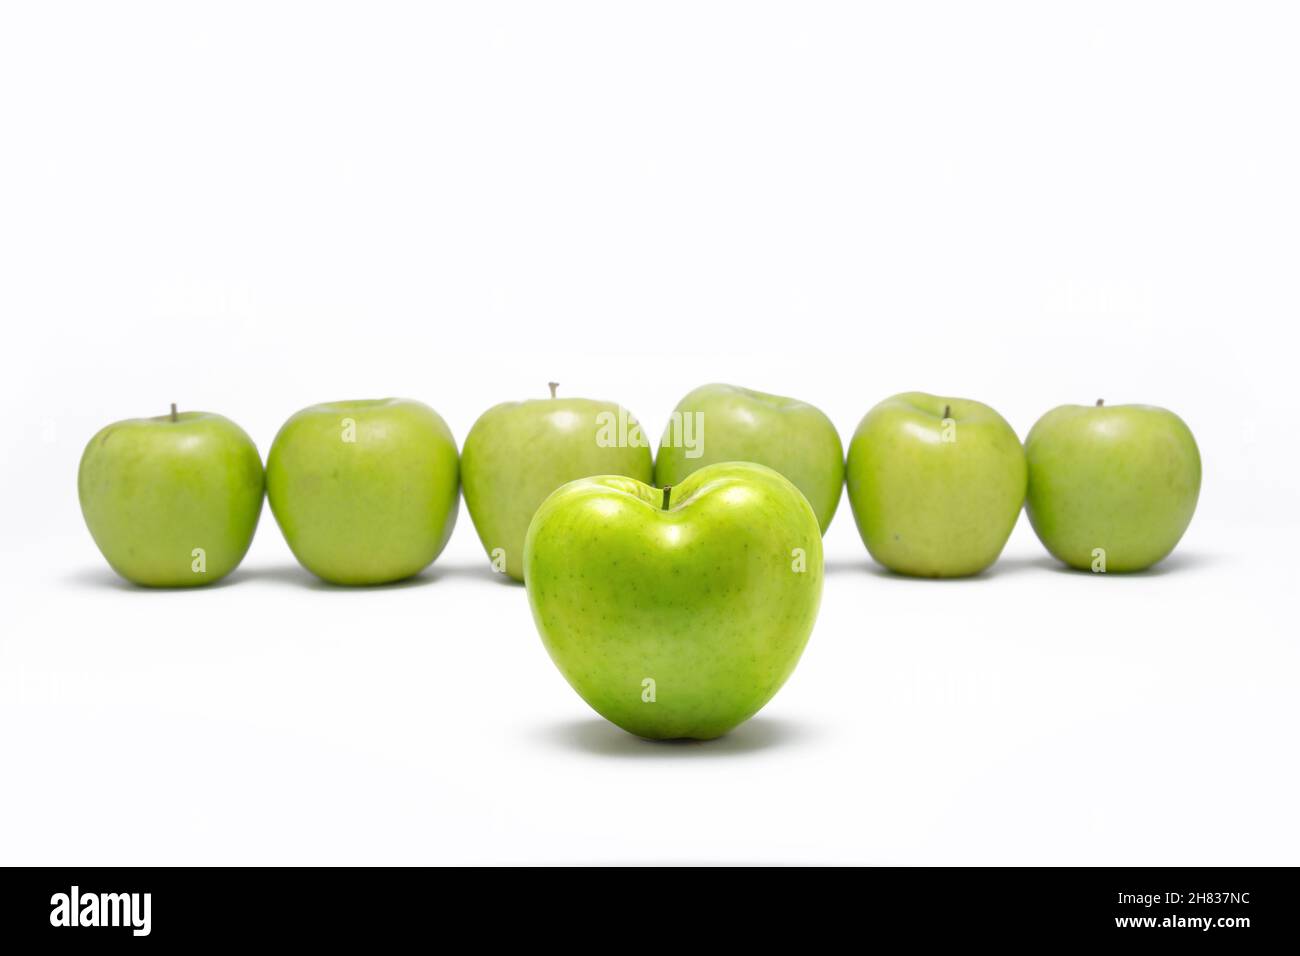 Green apple heart shaped in front of other green apples in line. On white background. Stock Photo